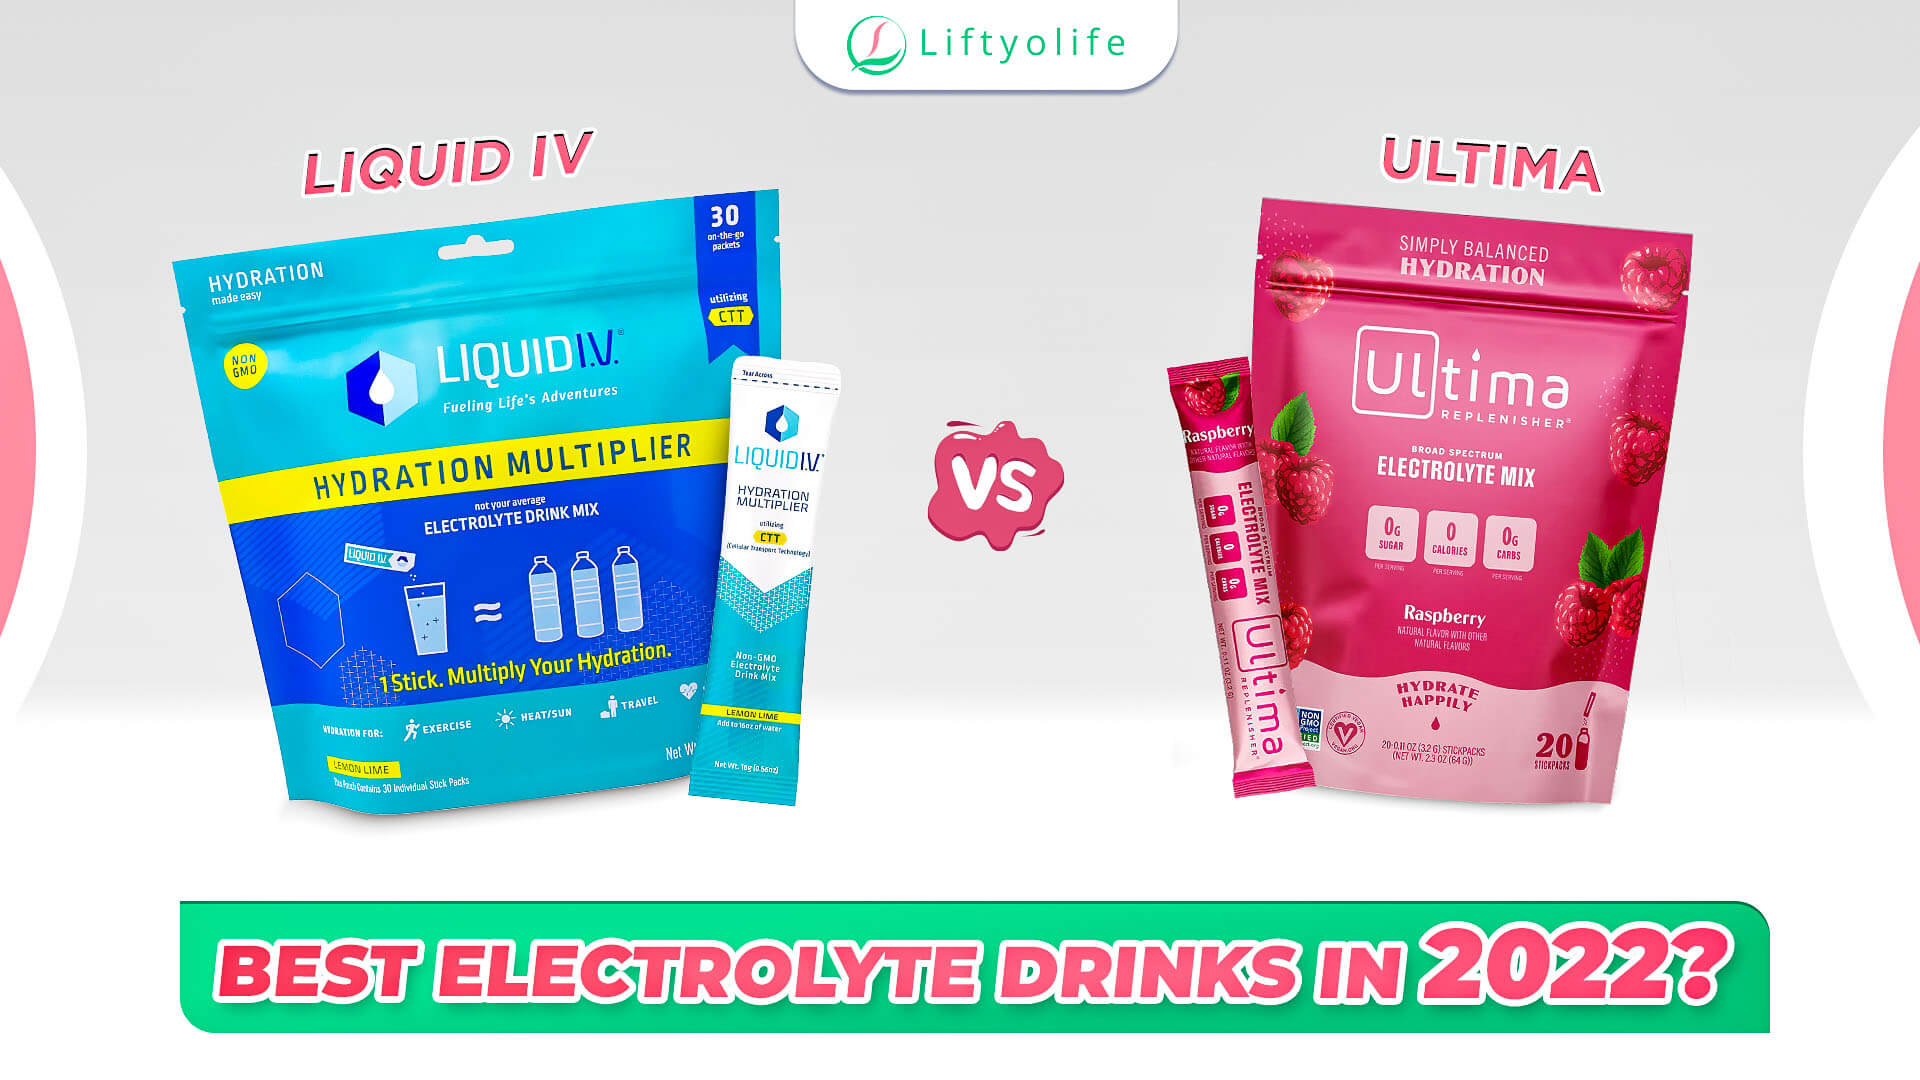 Liquid IV VS Ultima: Which Electrolyte Drinks Is Better?